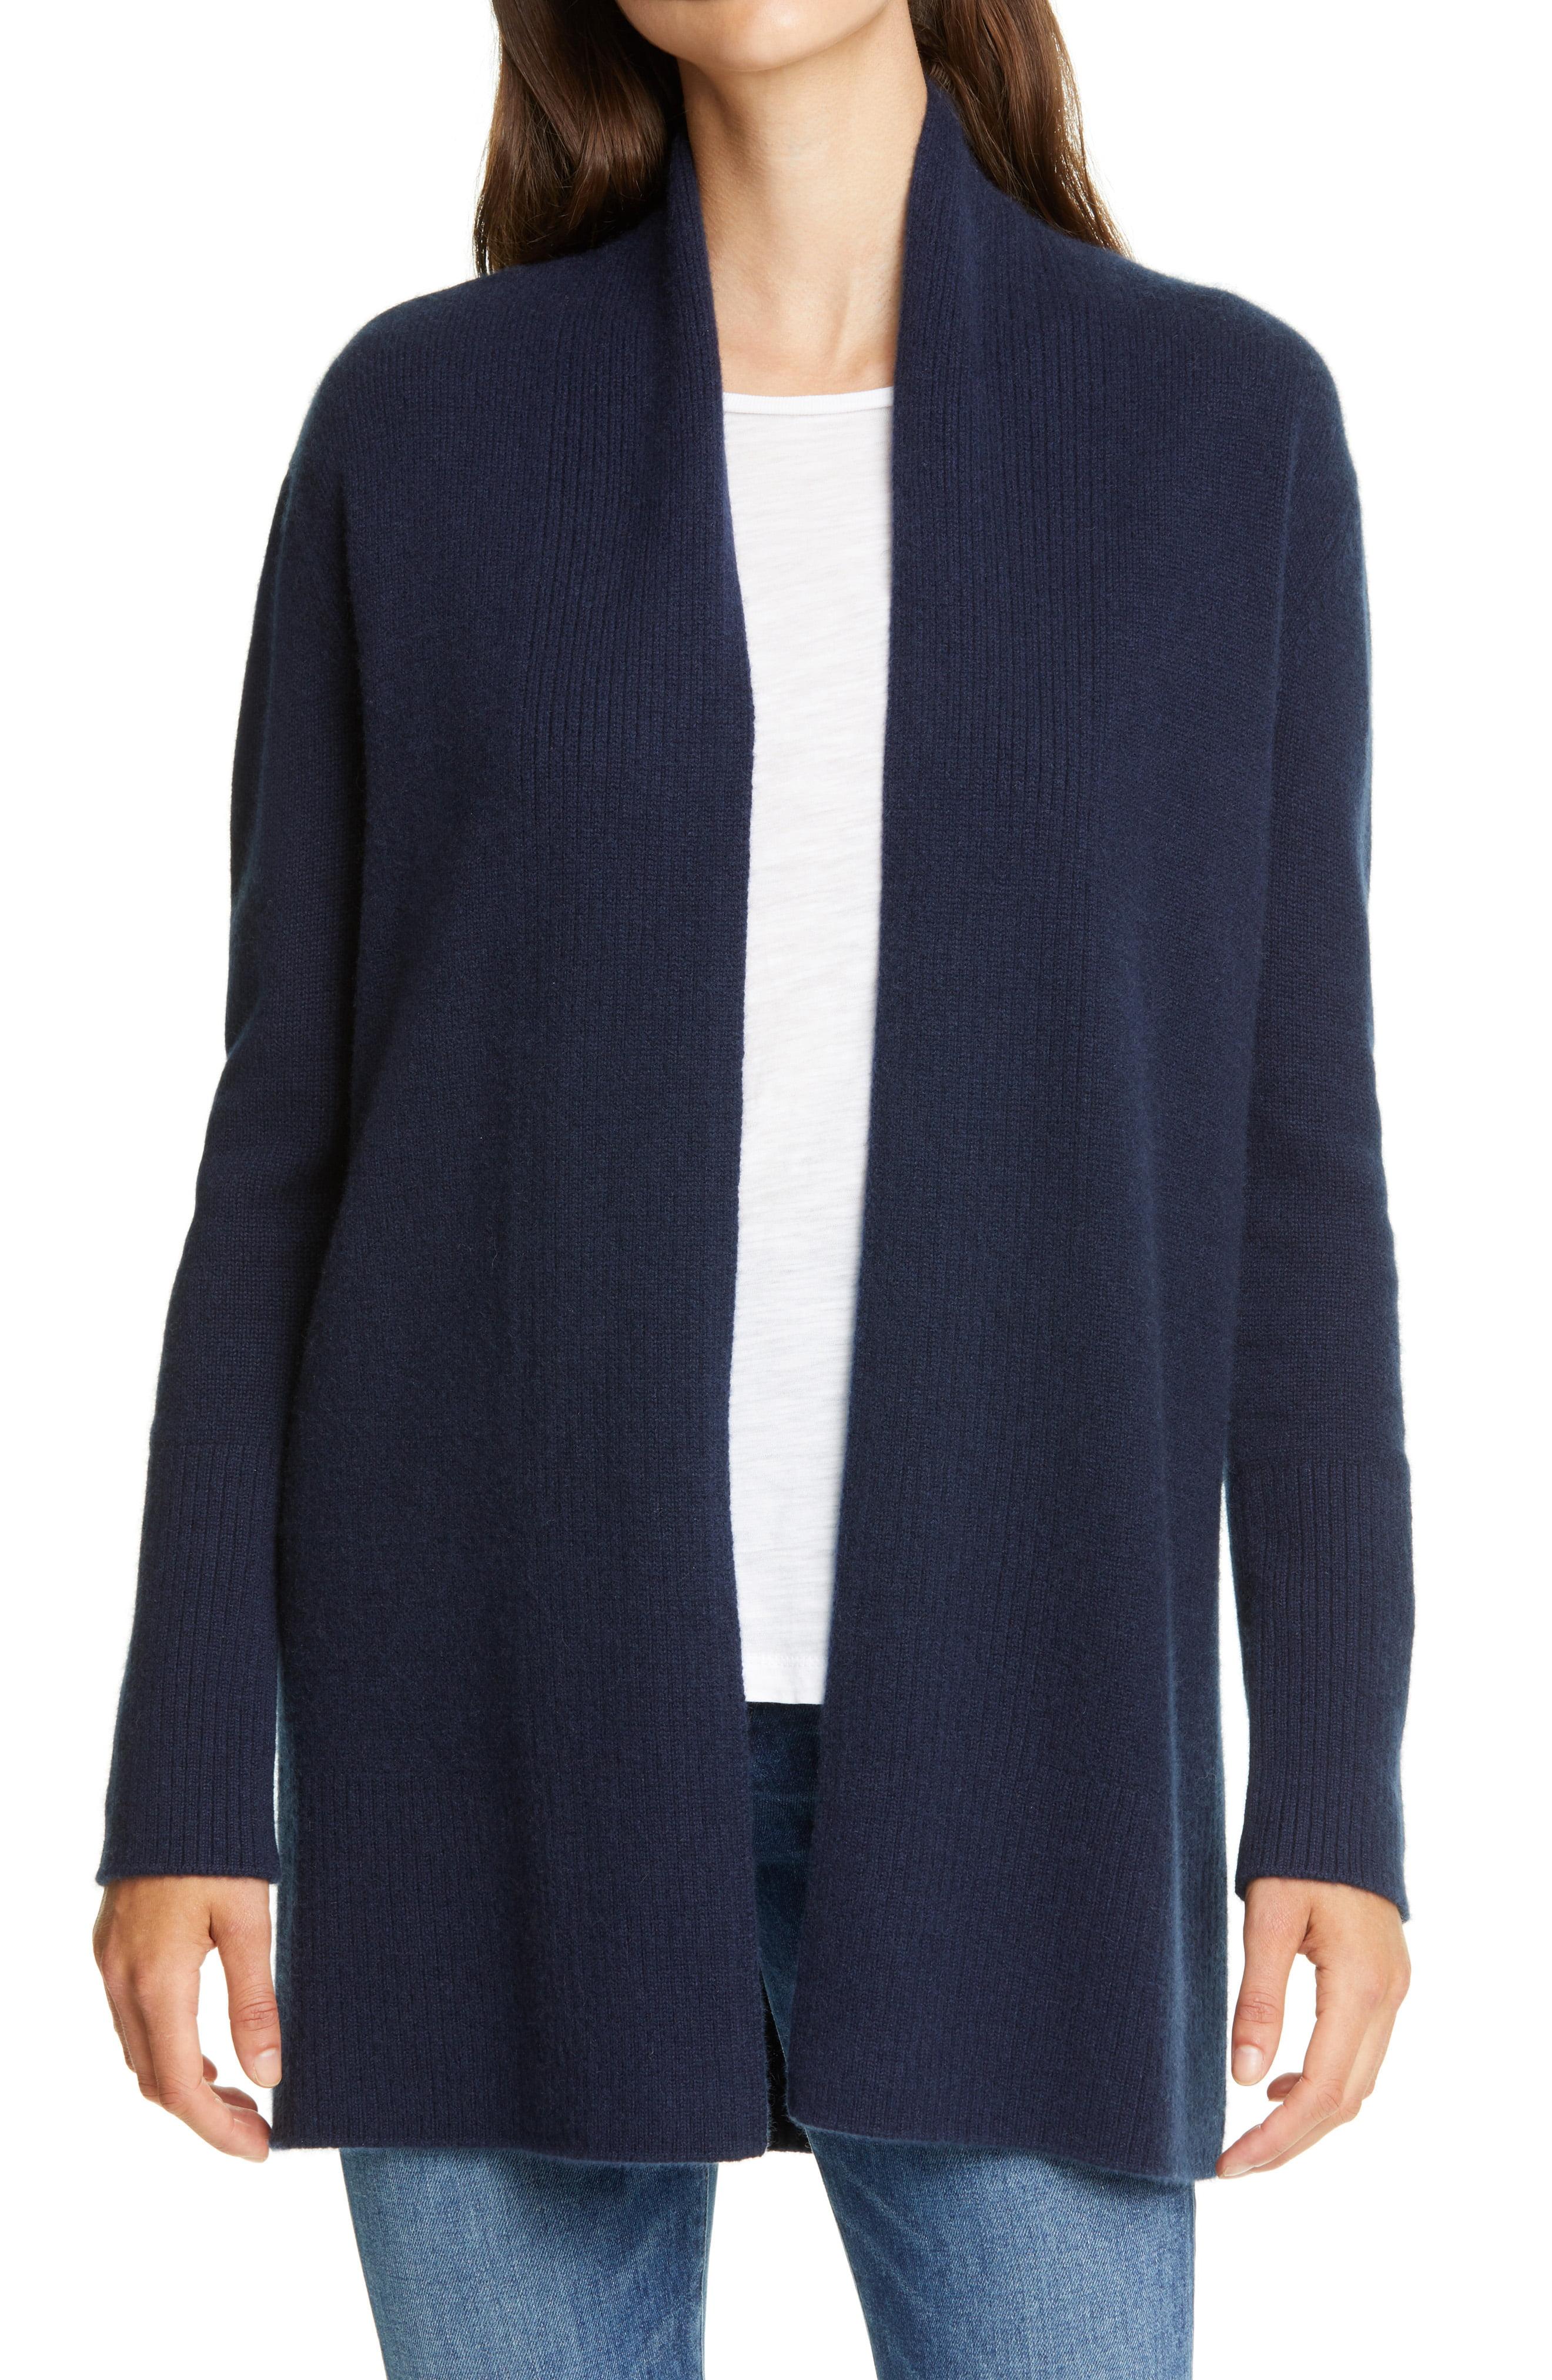 Nordstrom Open Front Cashmere Cardigan in Navy Night (Blue) - Lyst